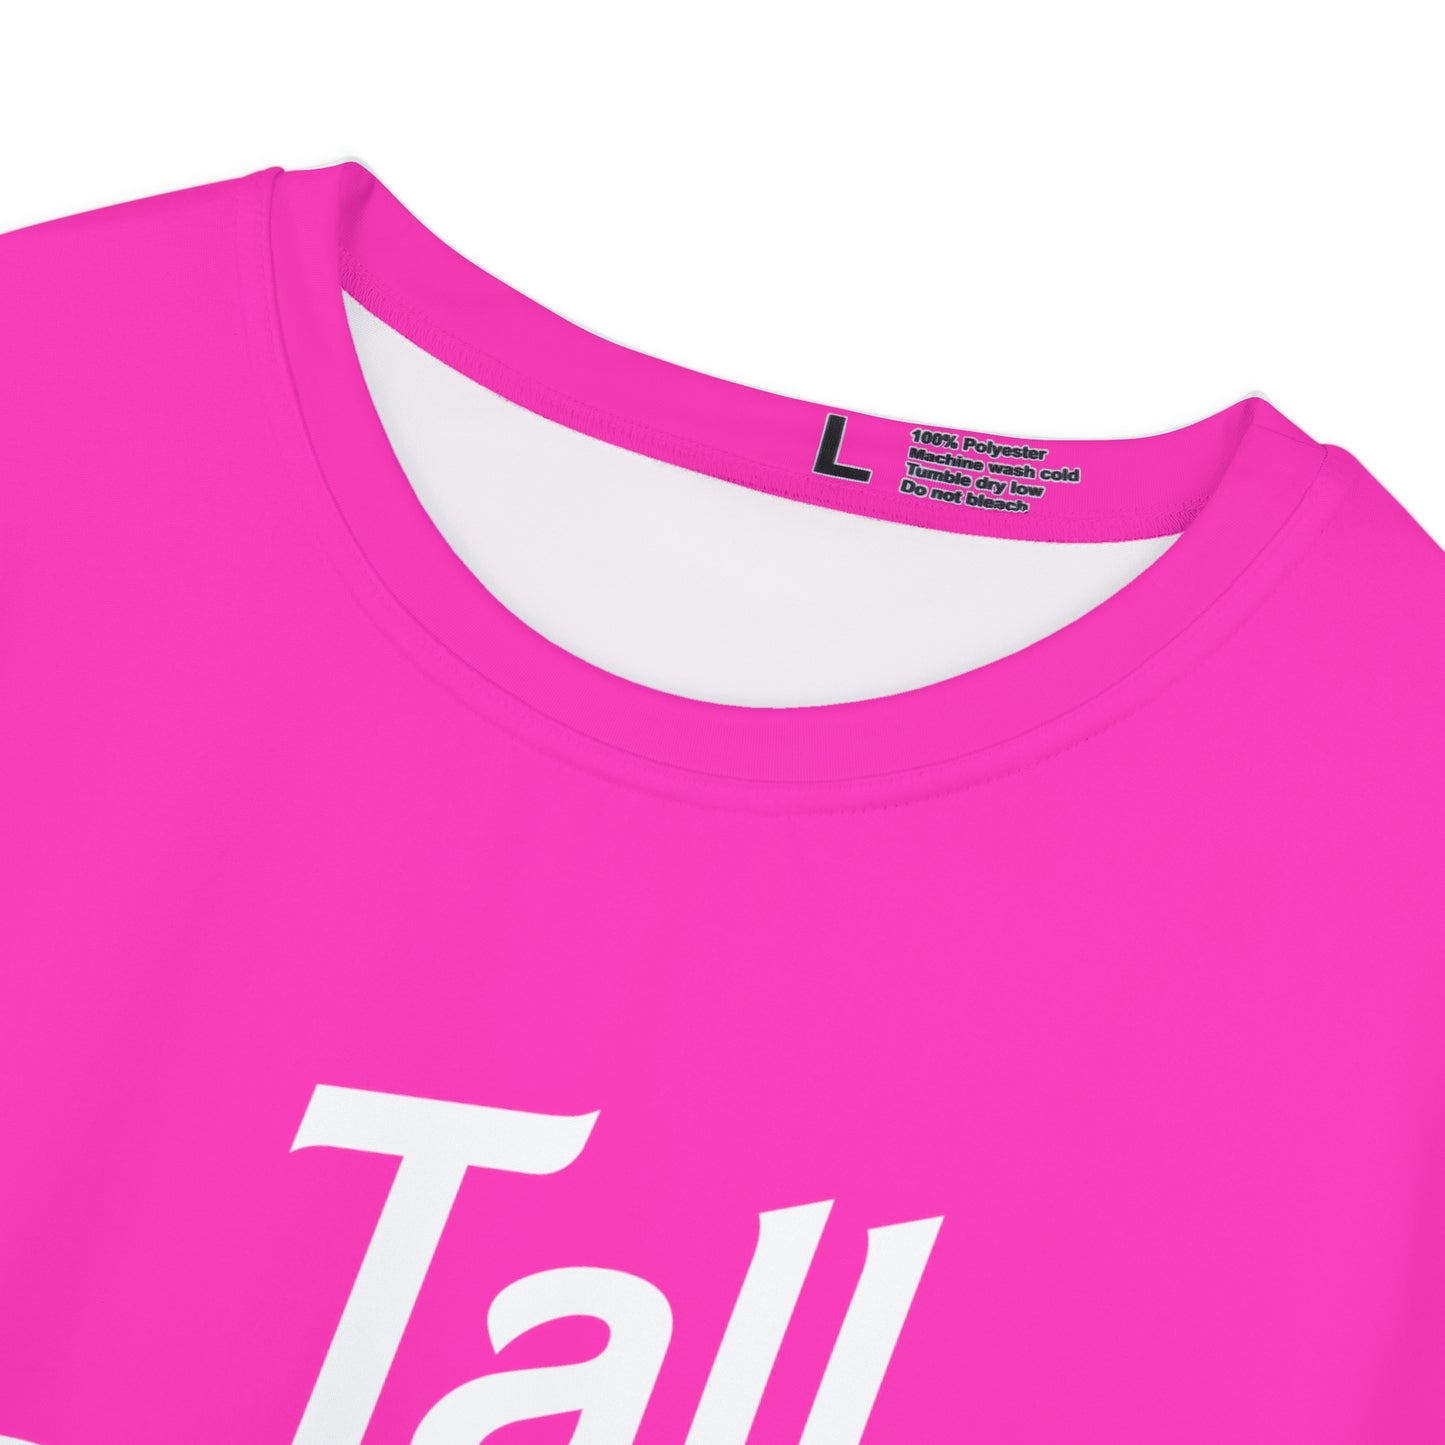 Tall Barbie, Bachelorette Party Shirts, Bridesmaid Gifts, Here comes the Party Tees, Group Party Favor Shirts, Bridal Party Shirt for women